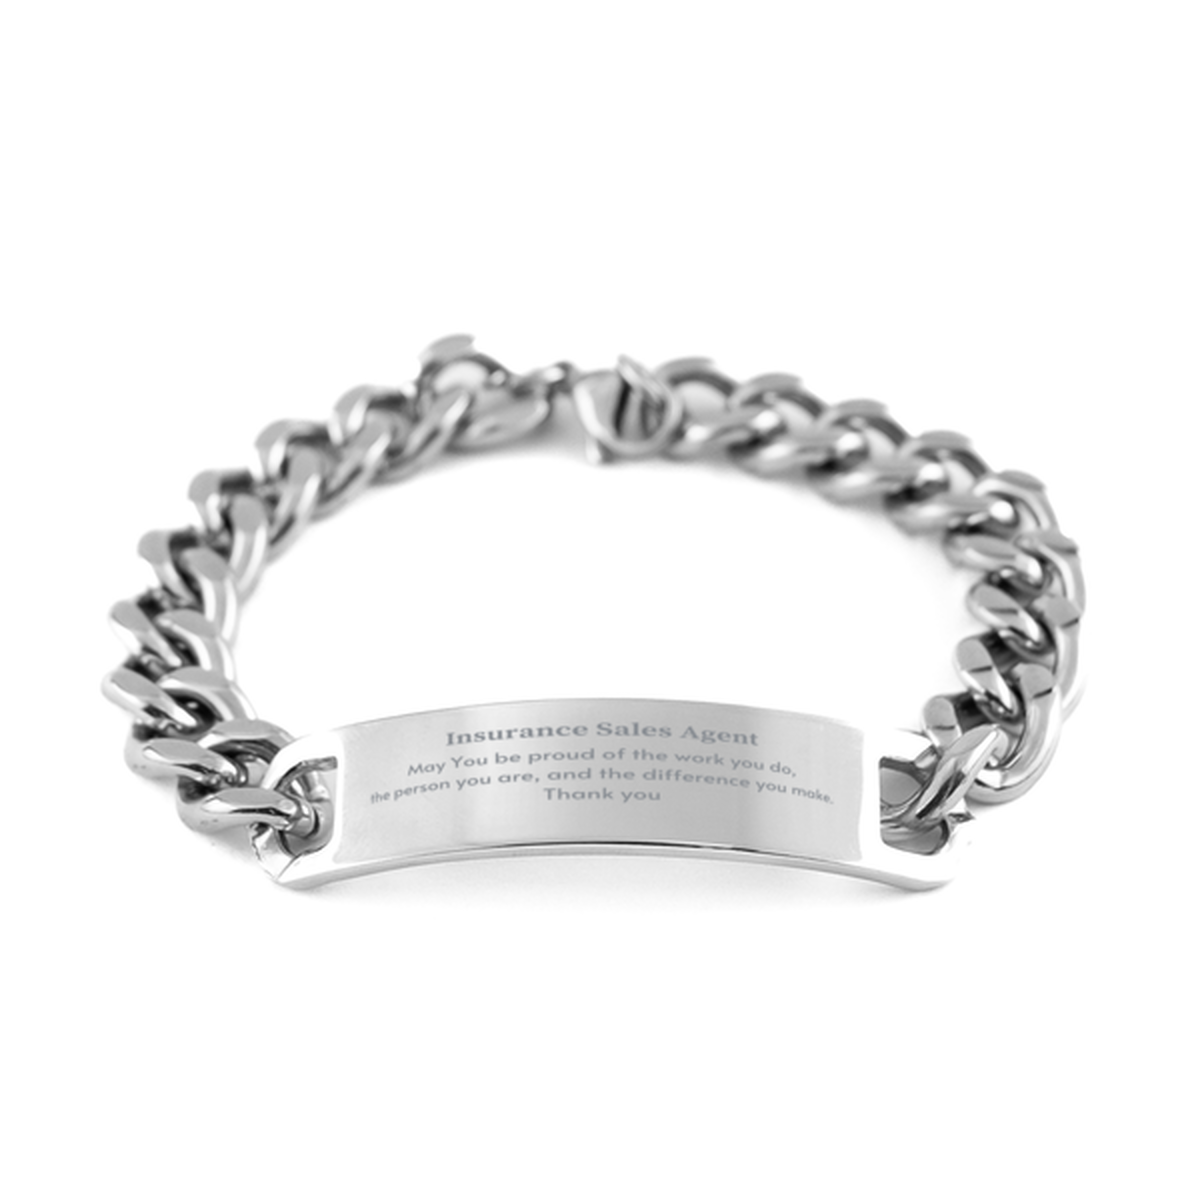 Heartwarming Cuban Chain Stainless Steel Bracelet Retirement Coworkers Gifts for Insurance Sales Agent, Insurance Sales Agent May You be proud of the work you do, the person you are Gifts for Boss Men Women Friends